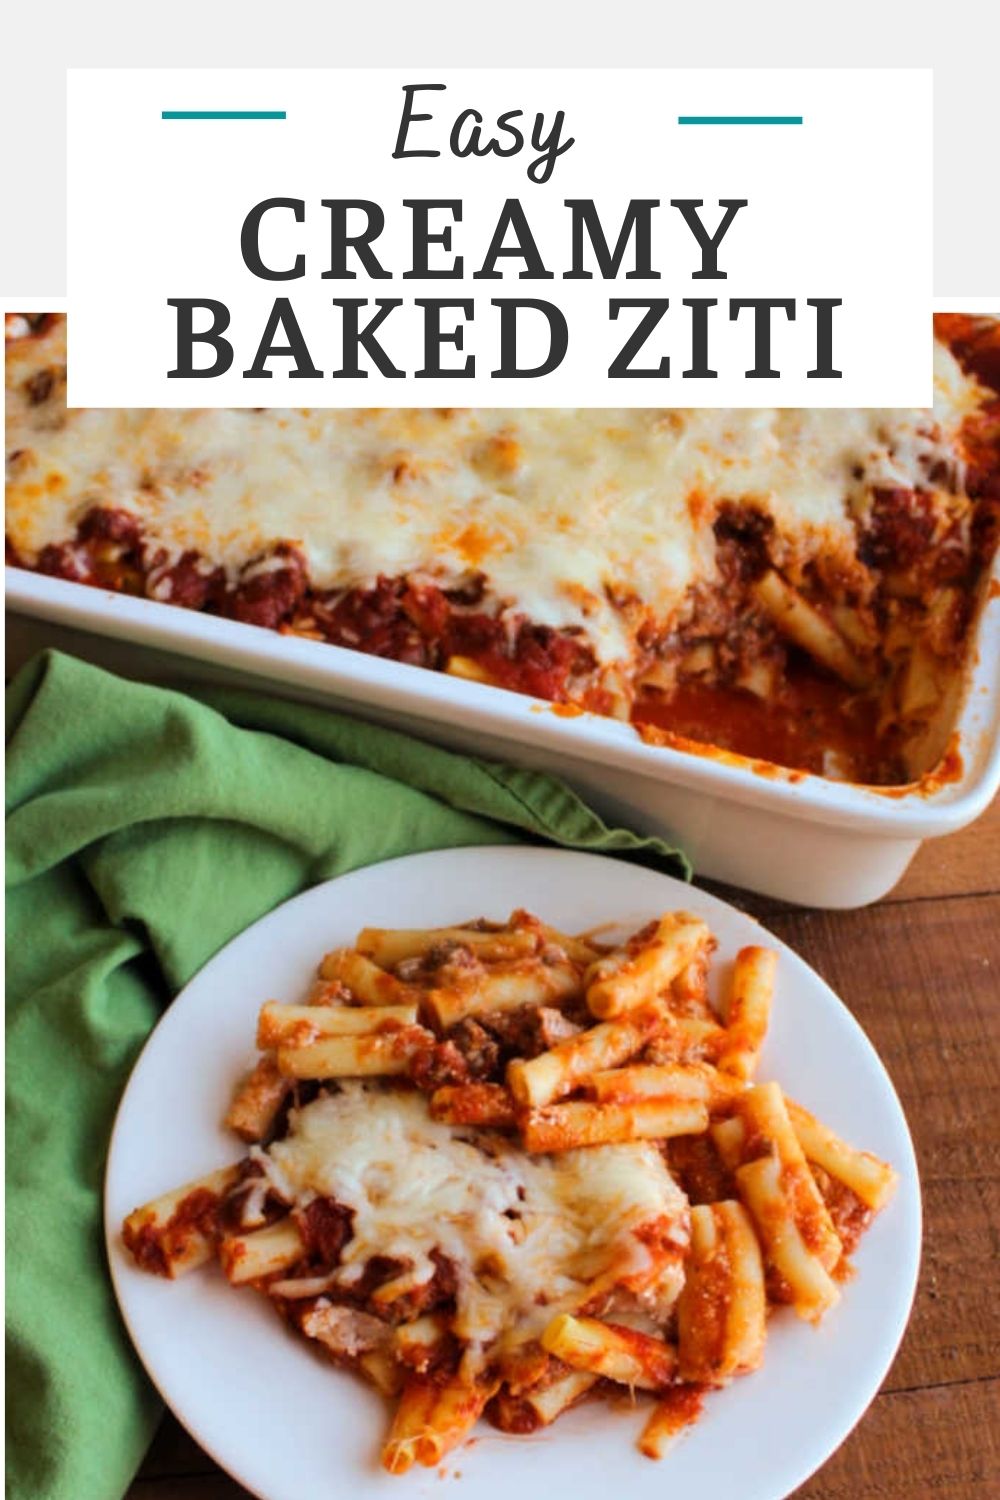 Baked ziti is a perfect family friendly fill them up kind of meal. It can be made ahead and baked to creamy, cheesy perfection.